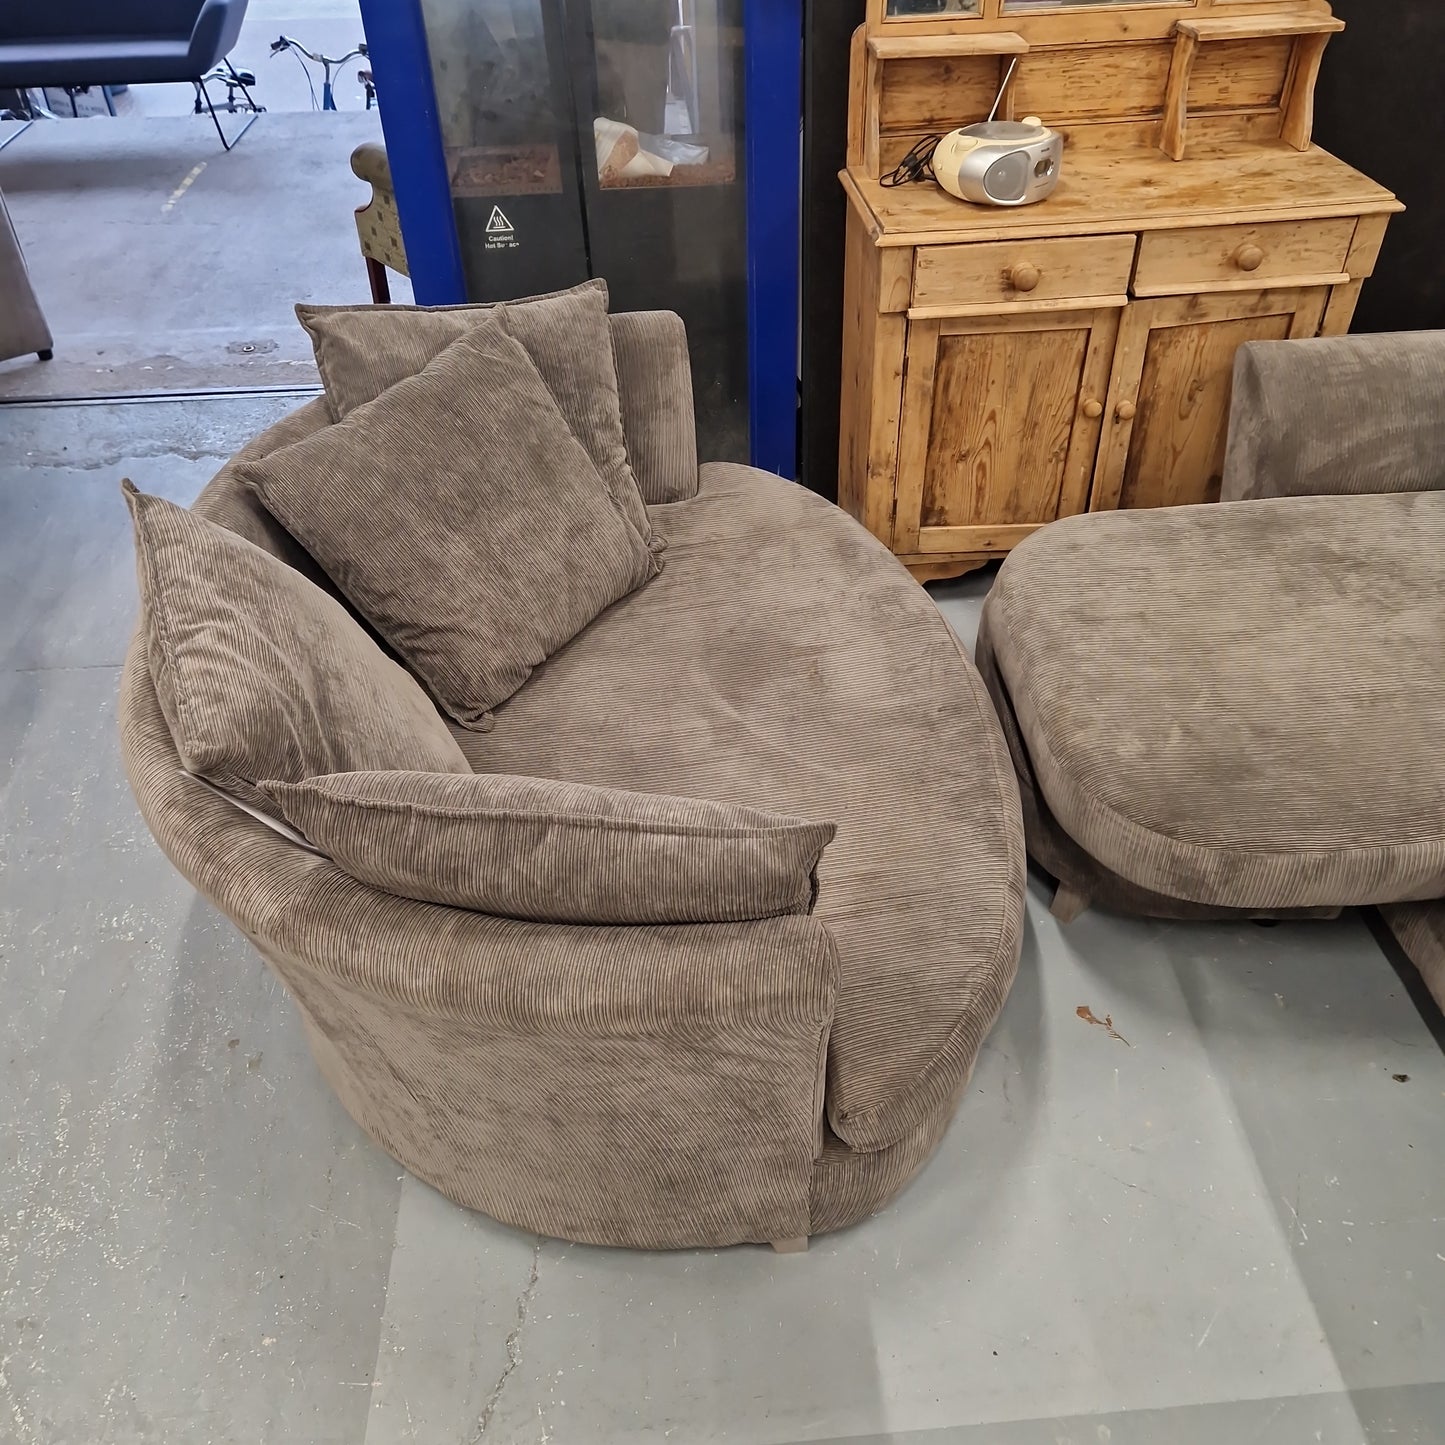 Large love seat cw 3 seater with return in brown fabric%A0 Q4223
WAS €550
NOW €475